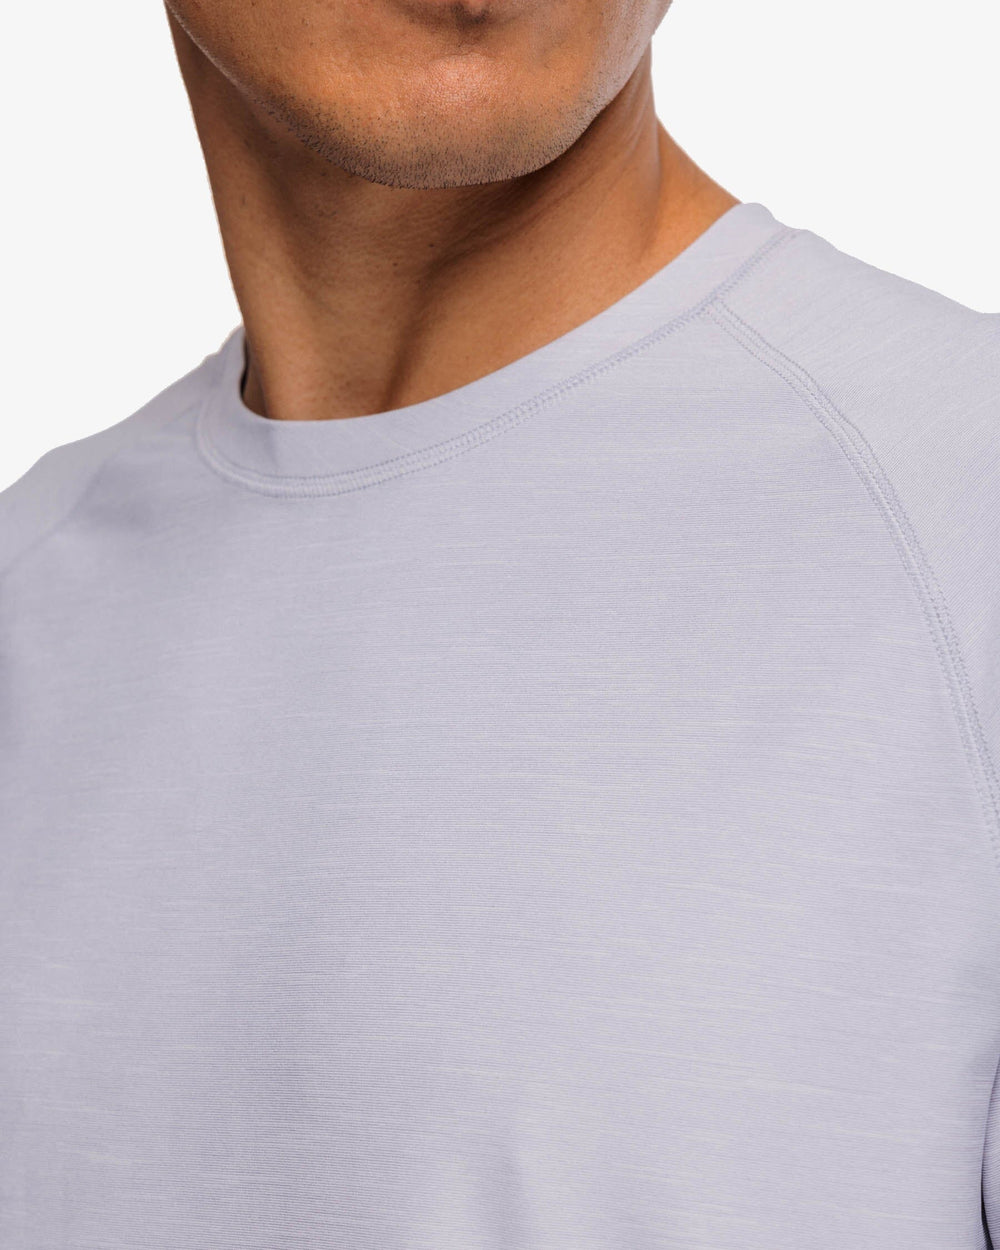 The detail view of the Southern Tide brrr-illiant Performance Long Sleeve Tee by Southern Tide - Platinum Grey